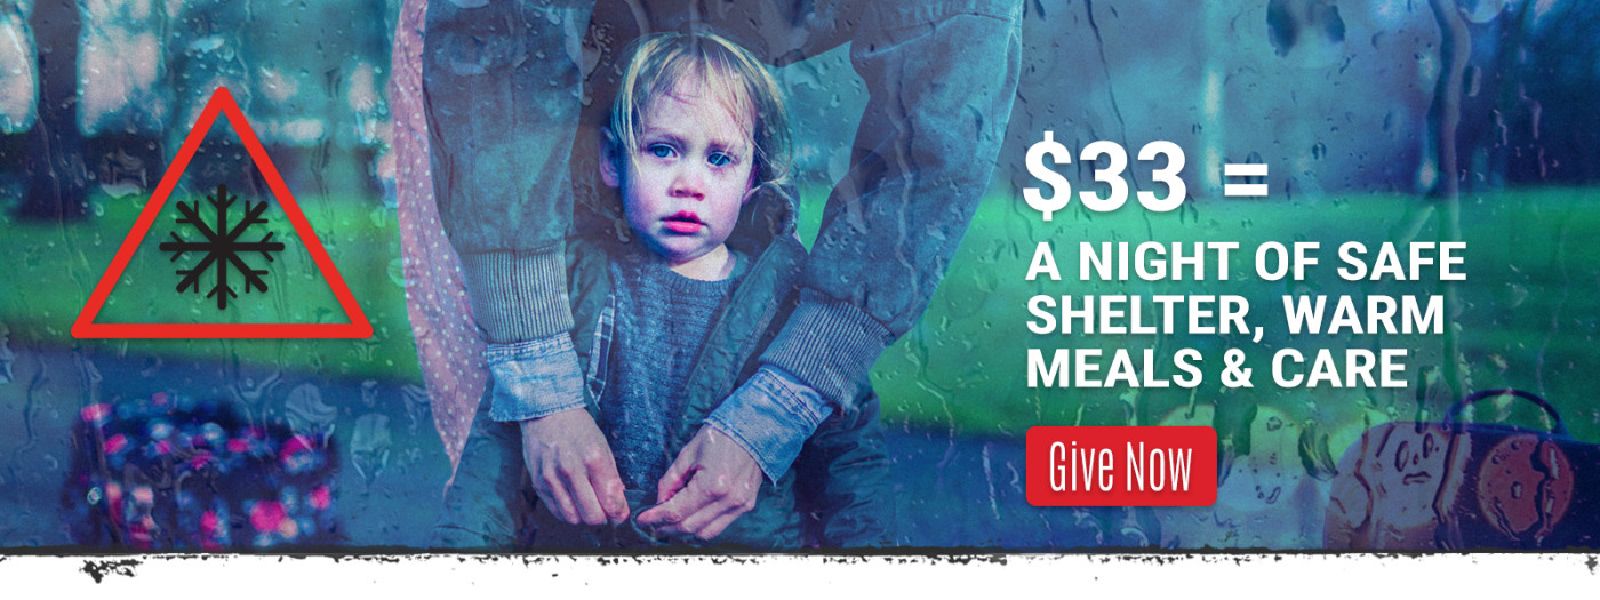 Parent zipping child's coat outside needing shelter, warm meals, care. Click to give $33 to provide a warm night of safety. 